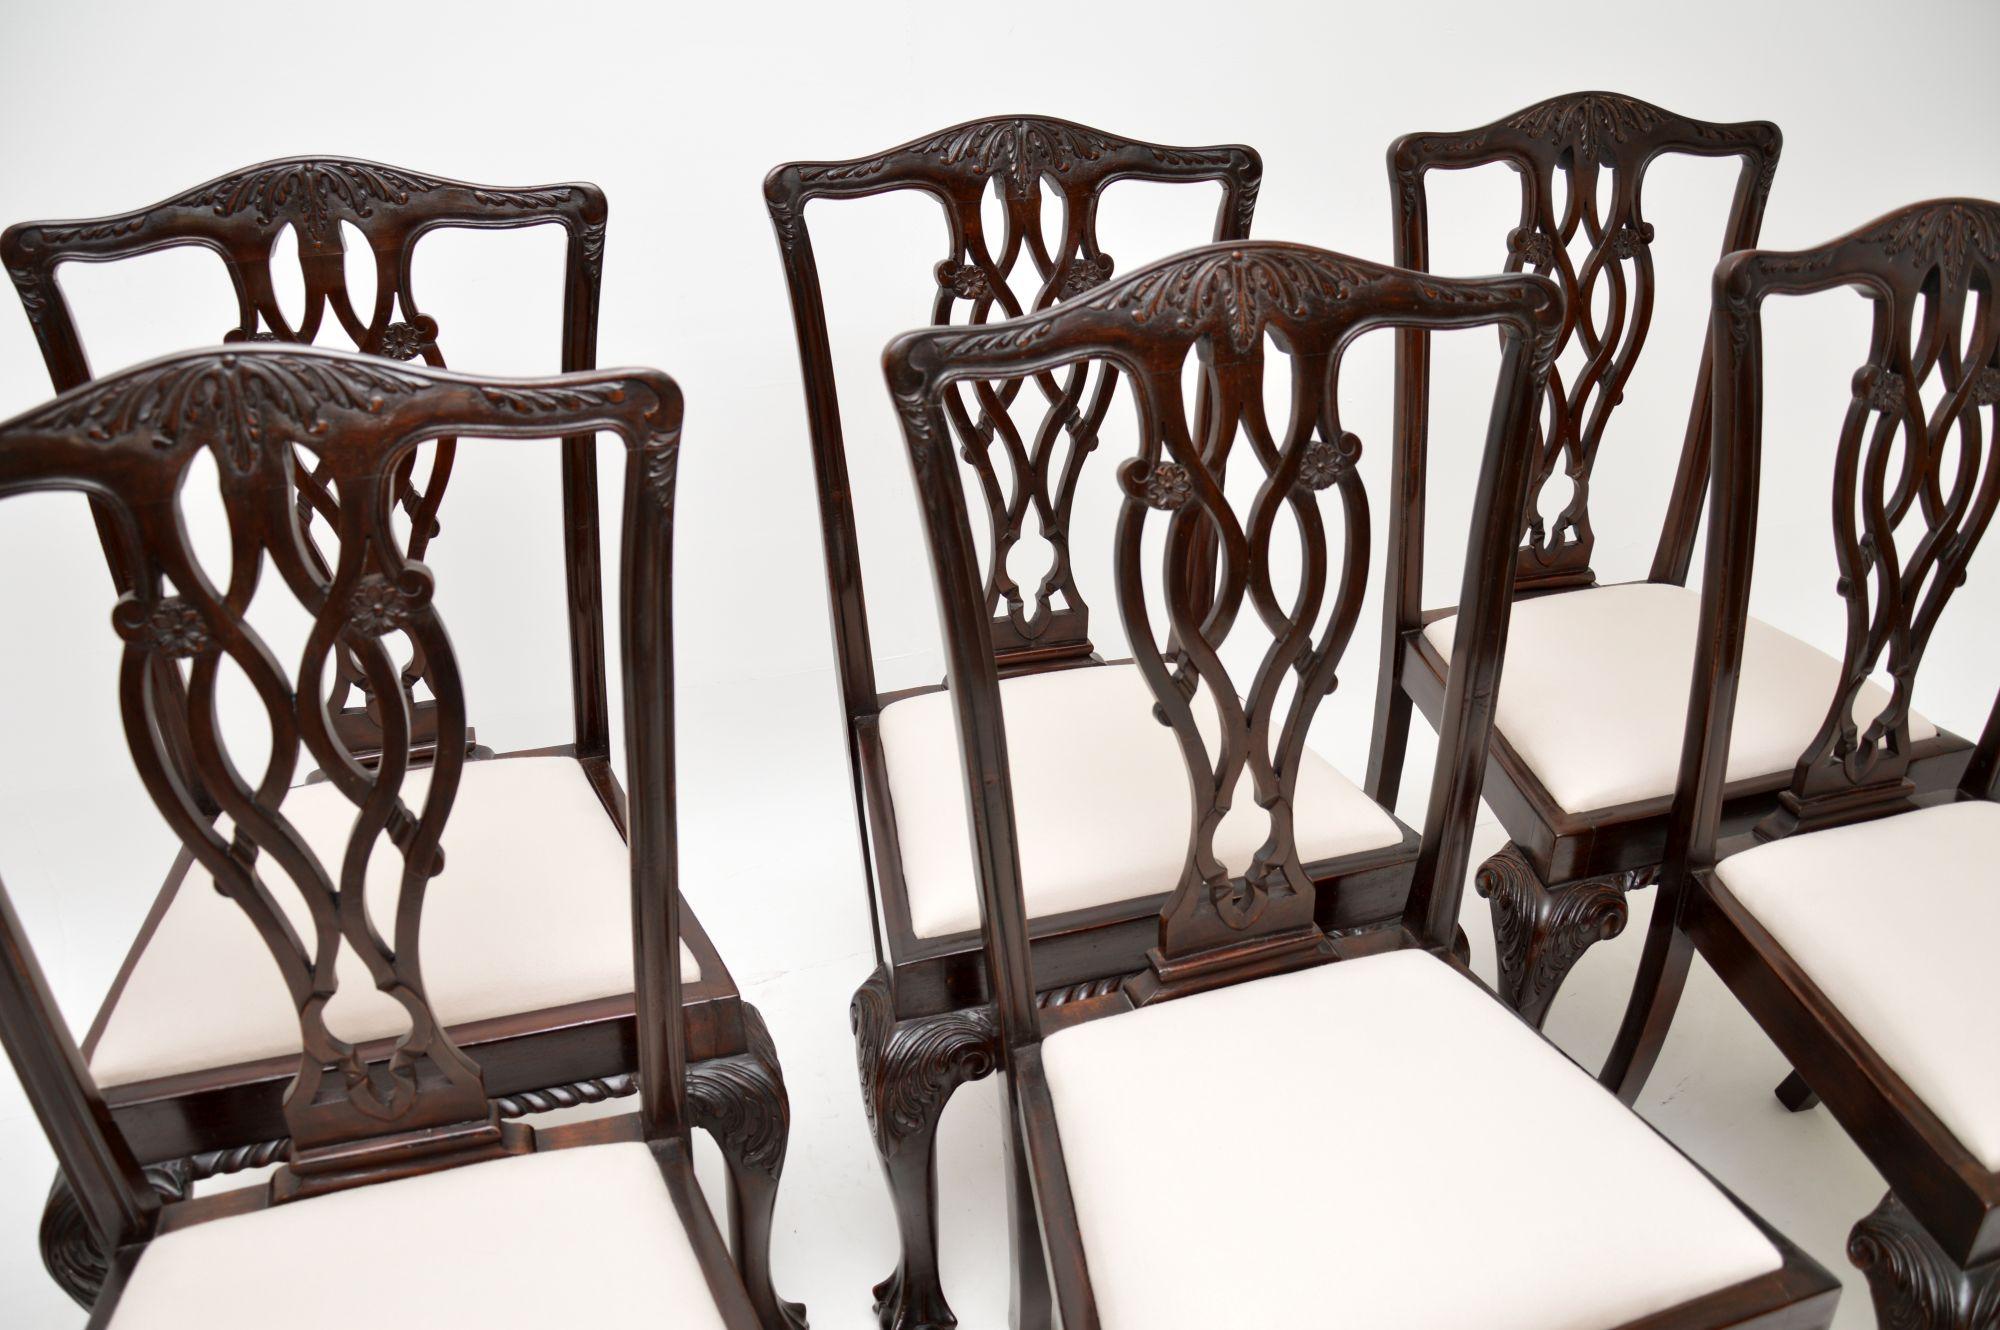 An excellent set of antique dining chairs in the classic Chippendale style. They were made in England, and date from around the 1890-1910 period.

The quality is superb, they are very sturdy and well made. The pierced back rests have lovely details,